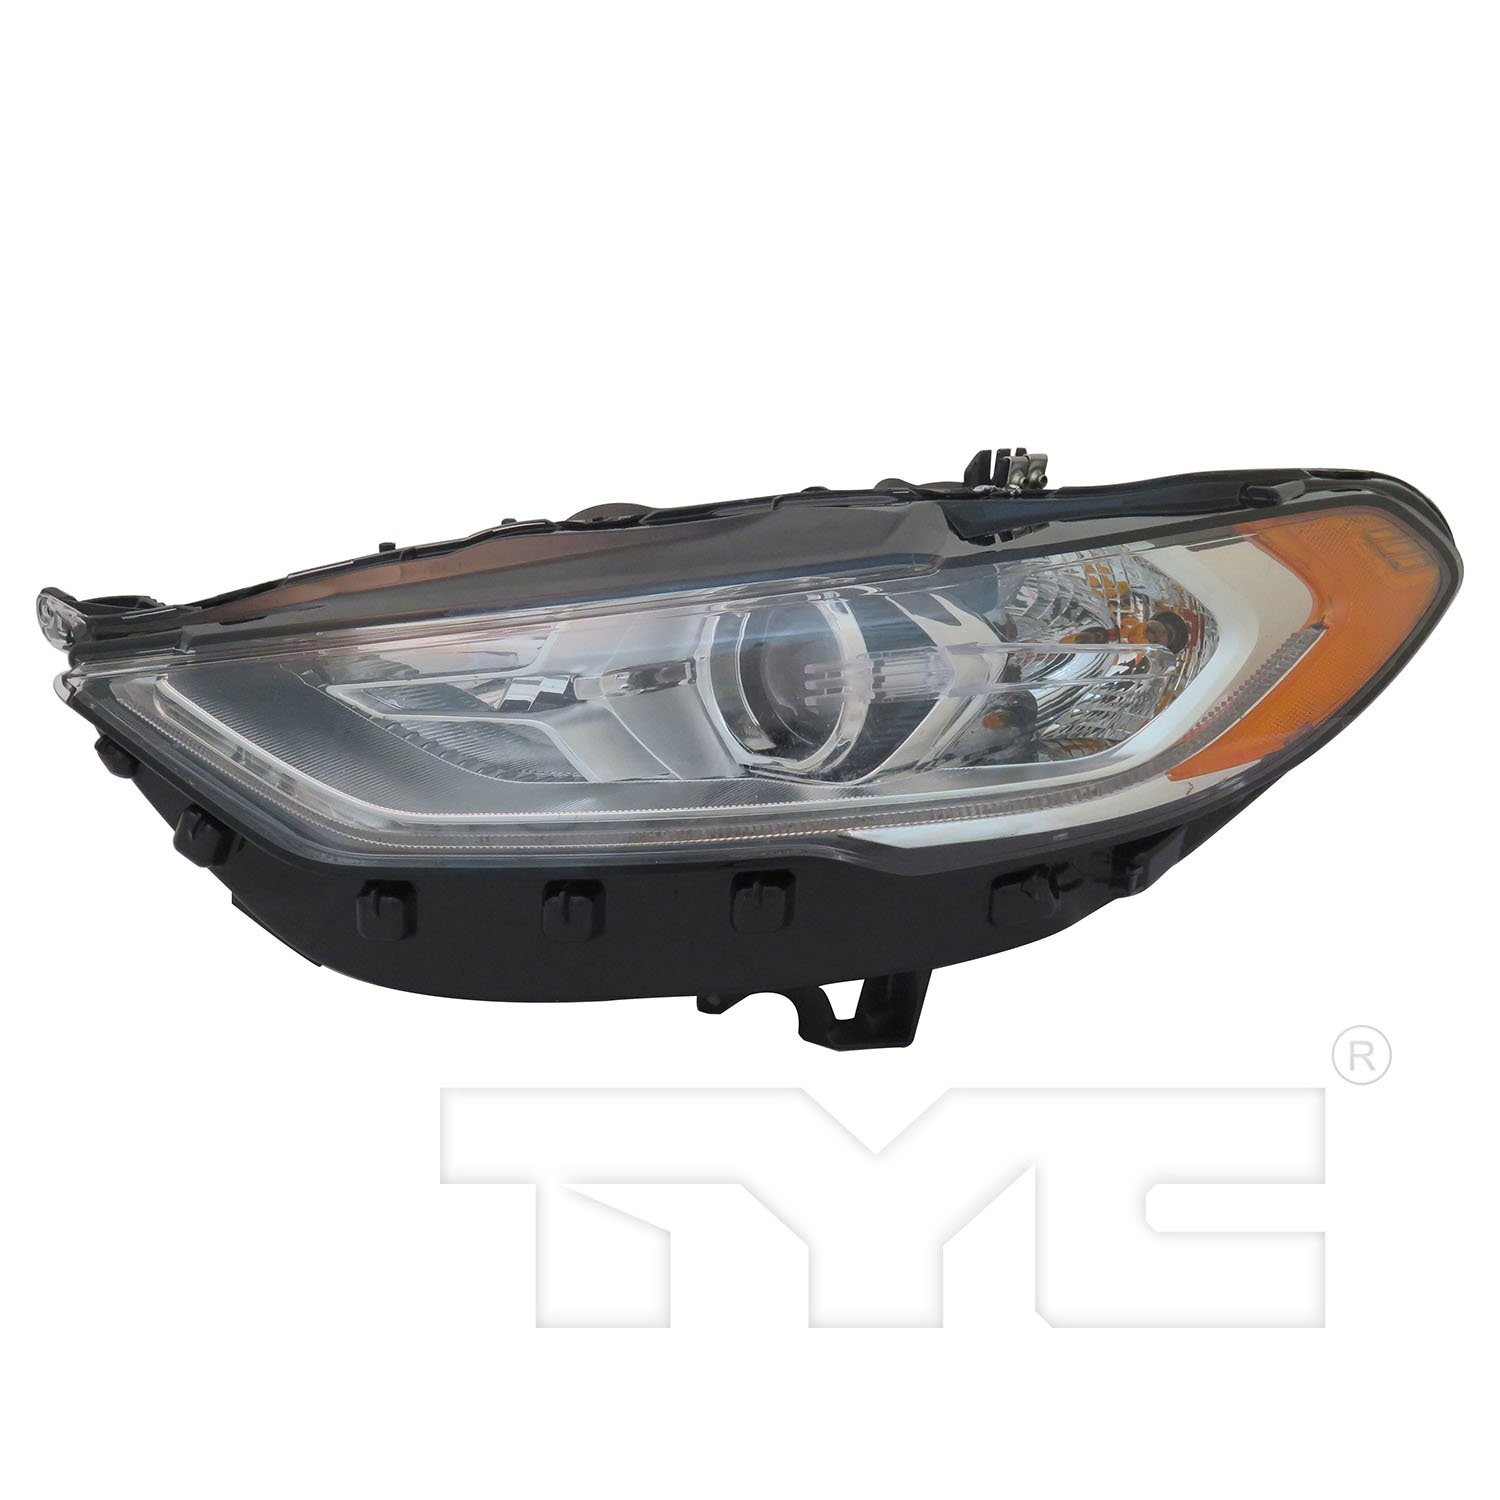 Aftermarket HEADLIGHTS for FORD - FUSION, FUSION,17-20,LT Headlamp assy composite